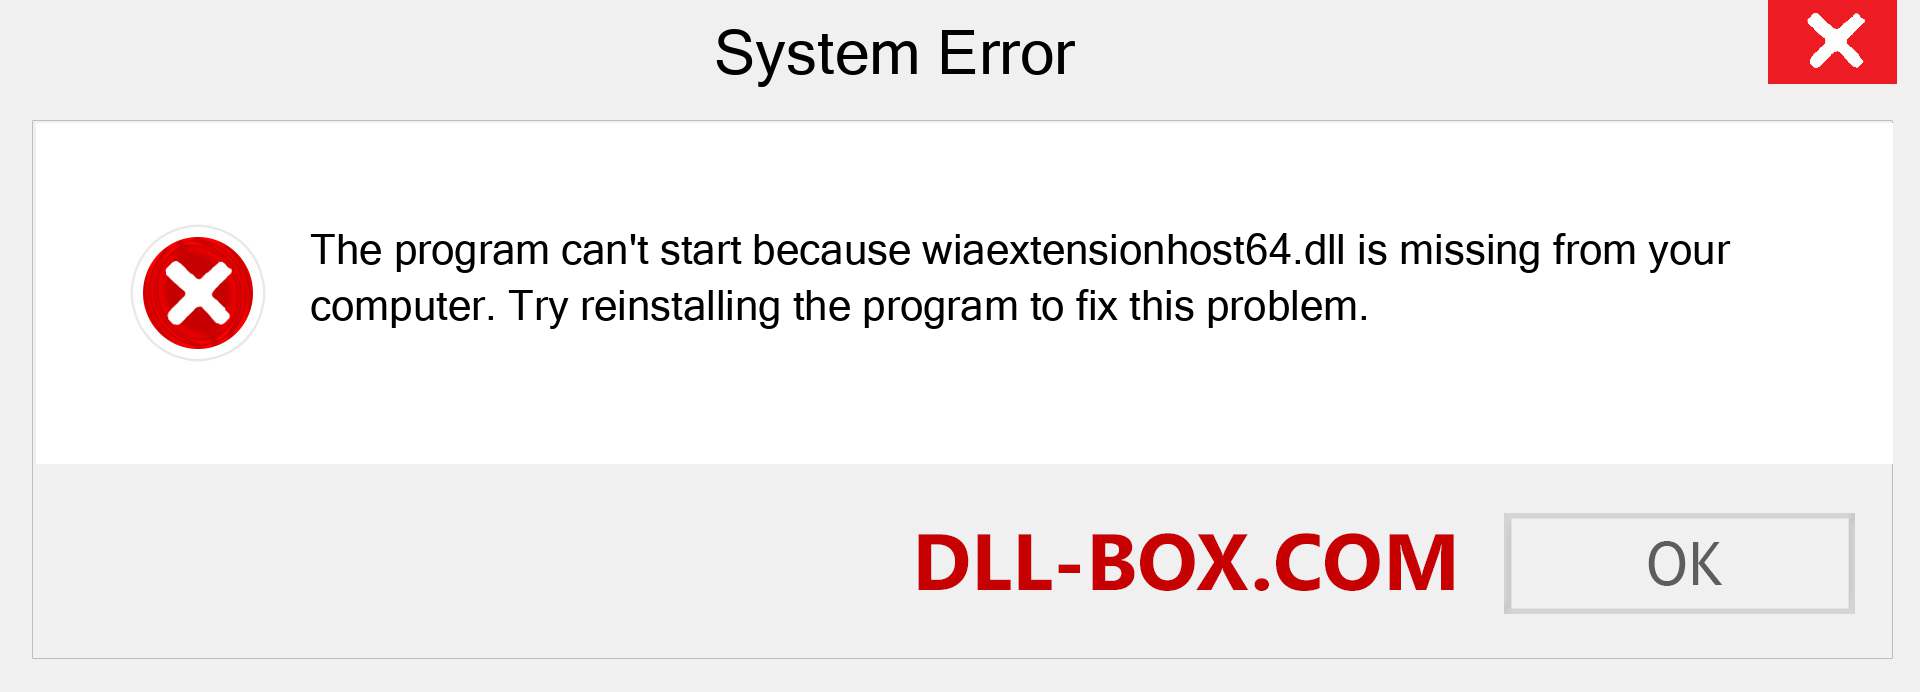  wiaextensionhost64.dll file is missing?. Download for Windows 7, 8, 10 - Fix  wiaextensionhost64 dll Missing Error on Windows, photos, images